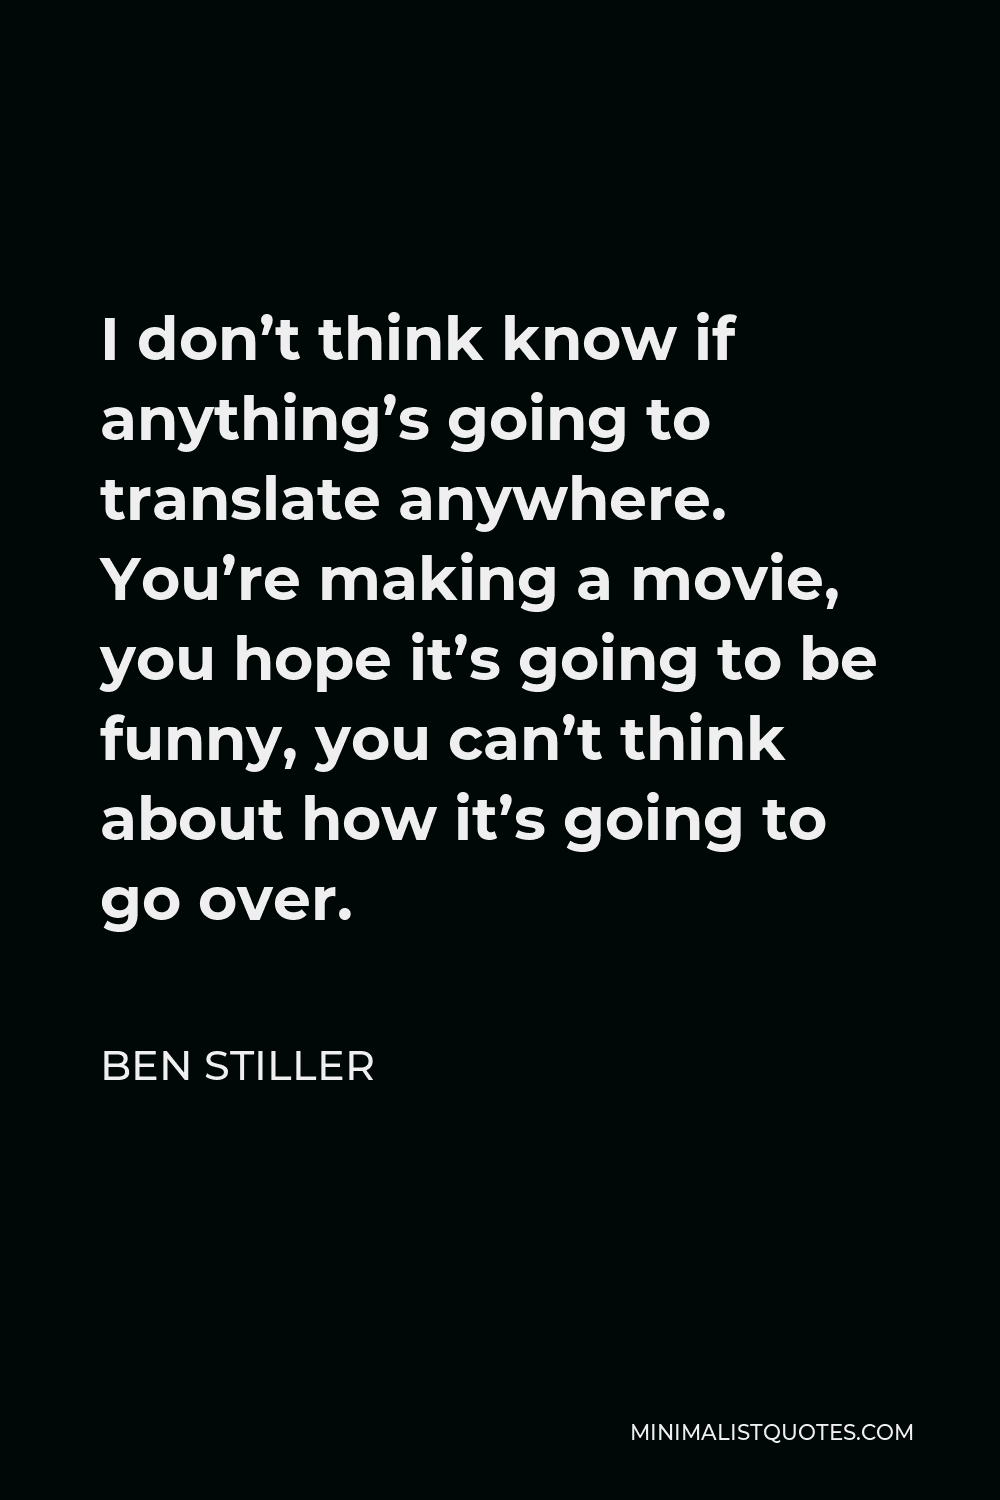 Ben Stiller Quote - I don’t think know if anything’s going to translate anywhere. You’re making a movie, you hope it’s going to be funny, you can’t think about how it’s going to go over.